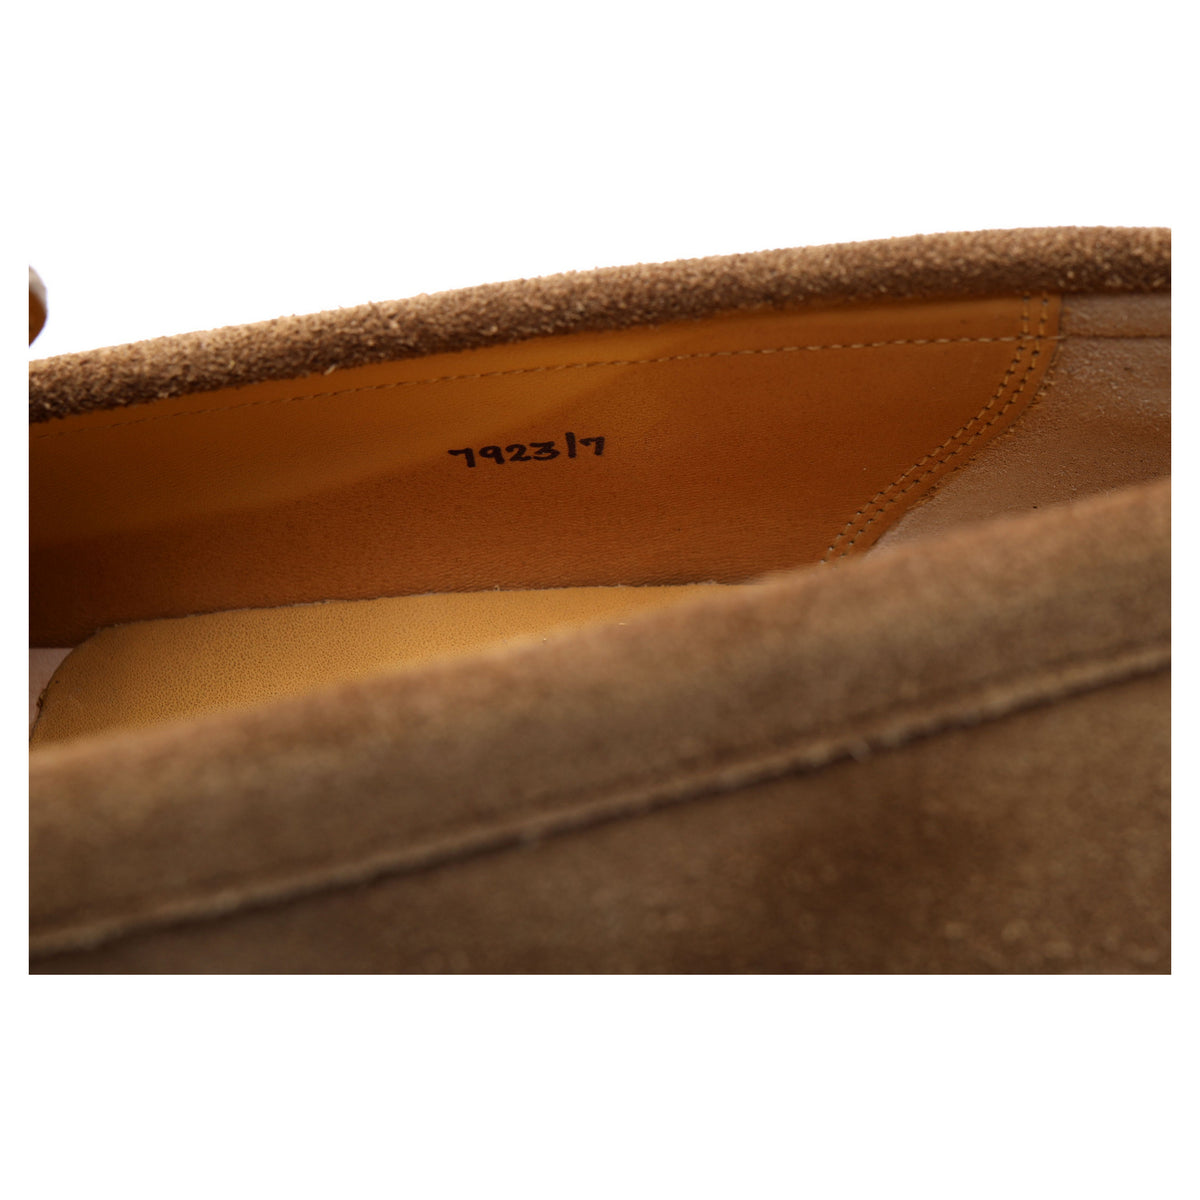 Tan Brown Suede Loafers UK 7